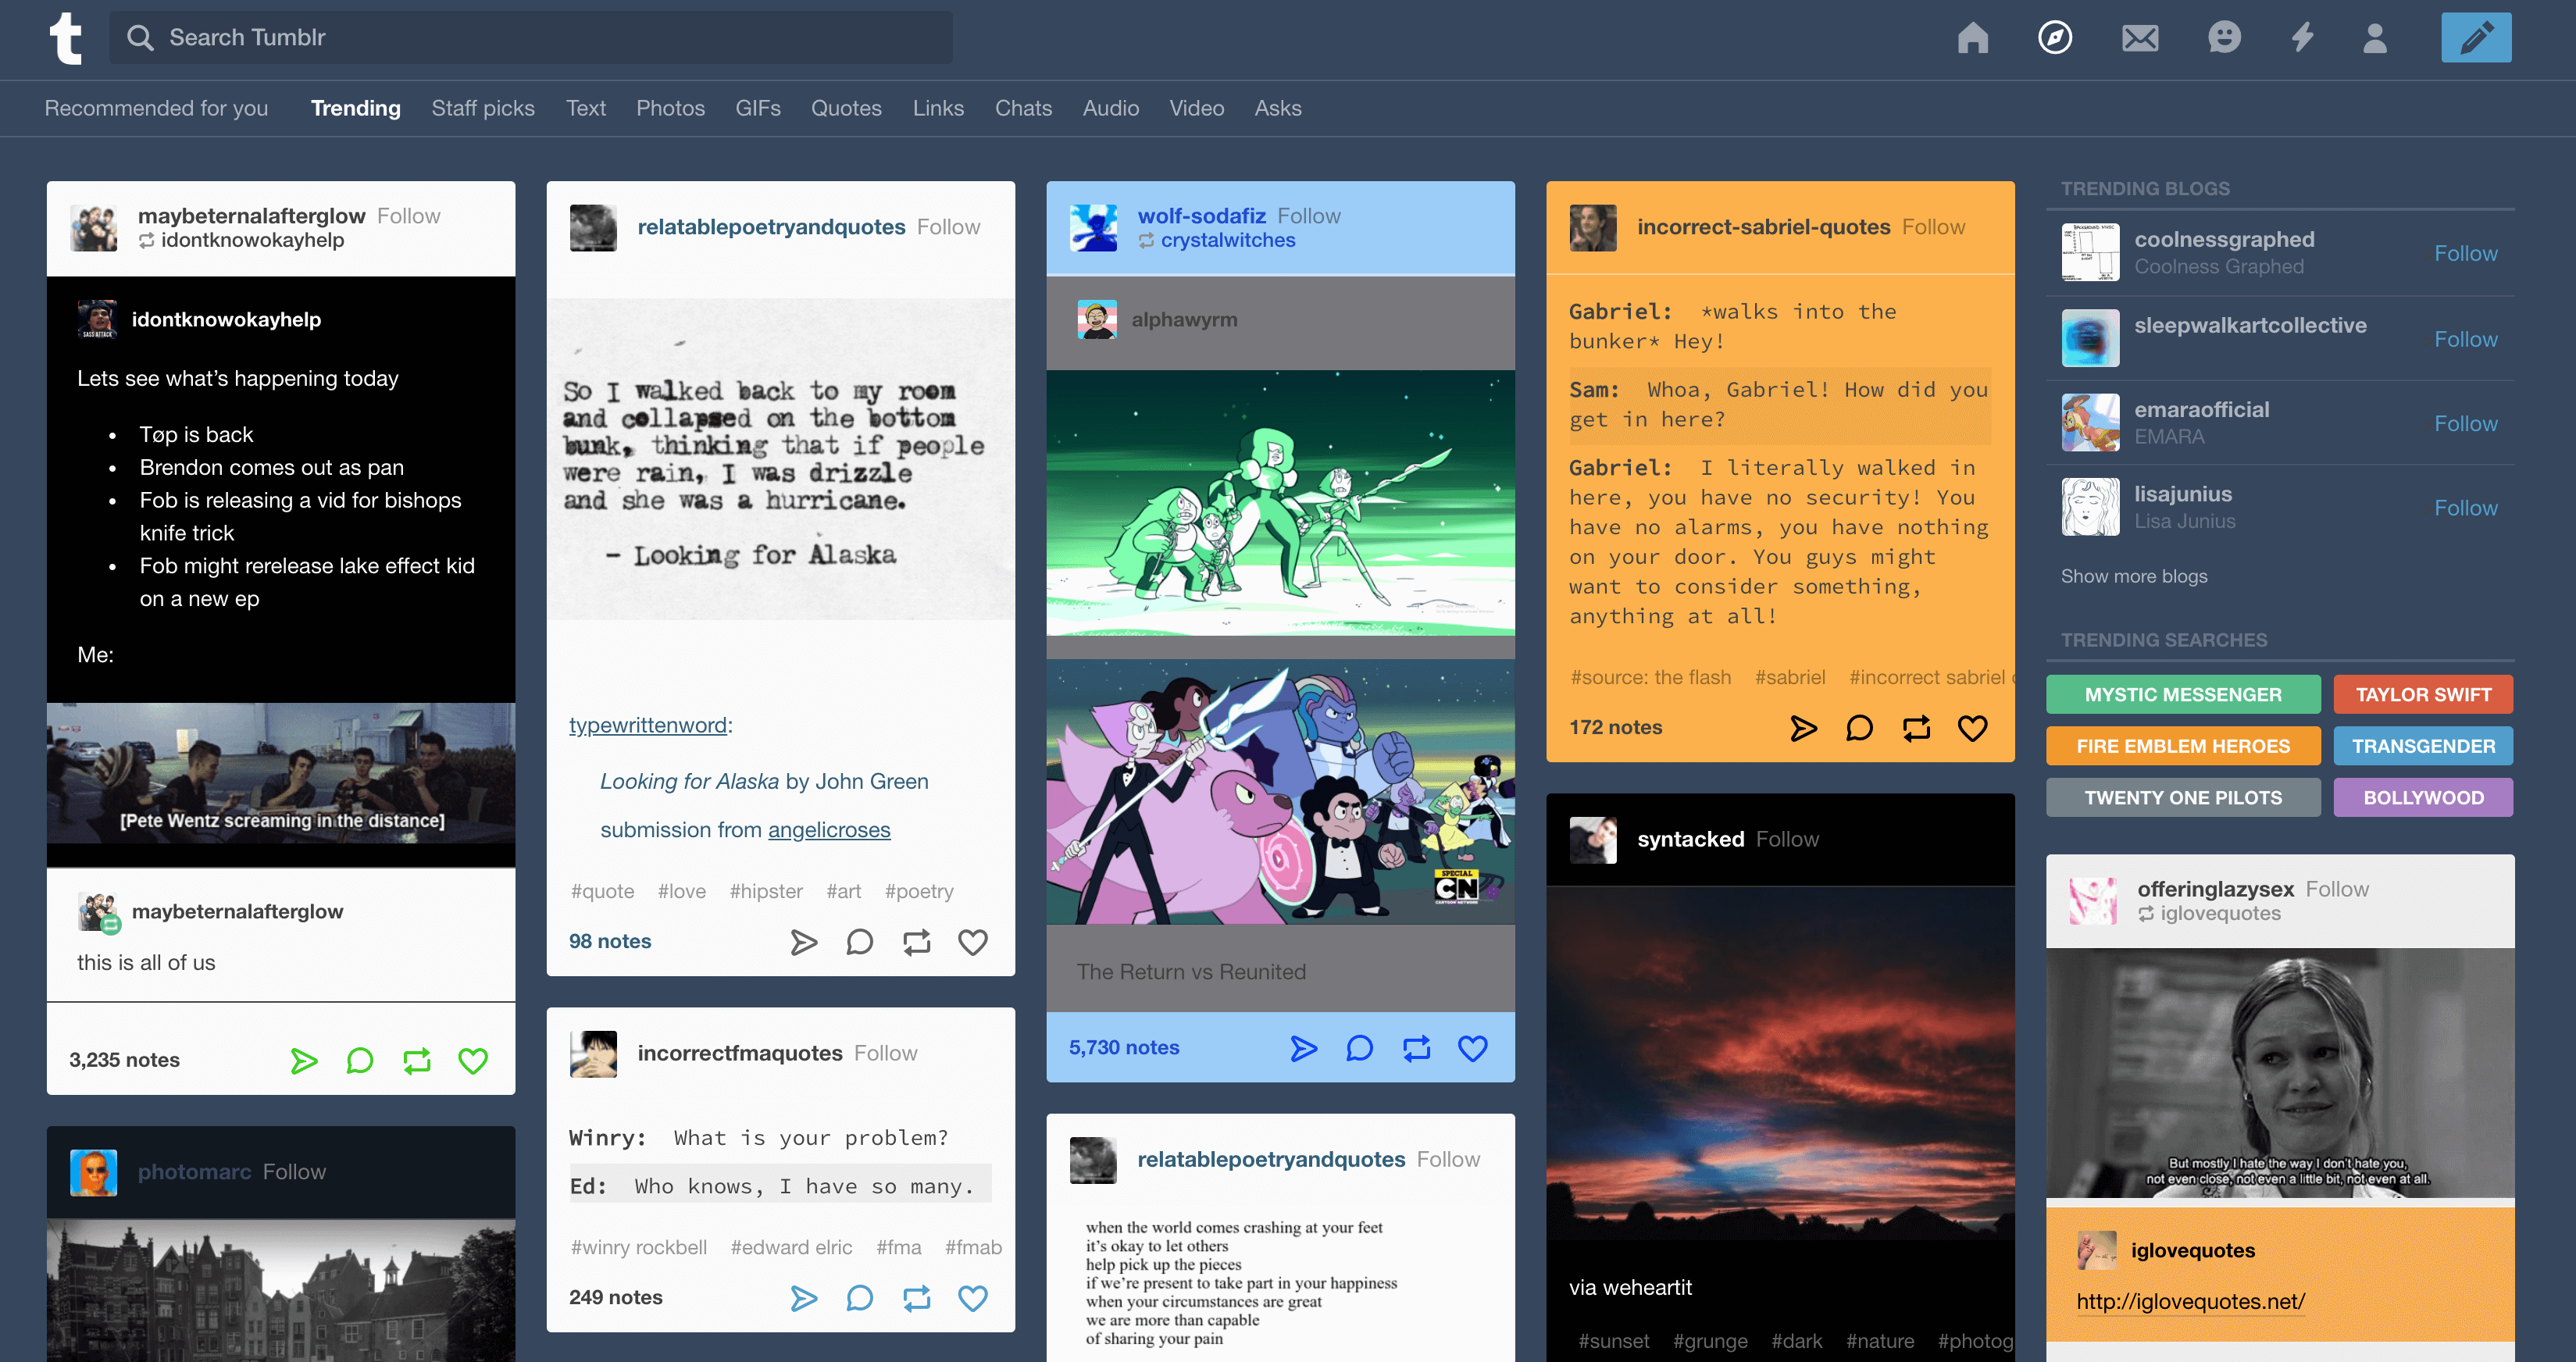 The Trending posts in Tumblr.